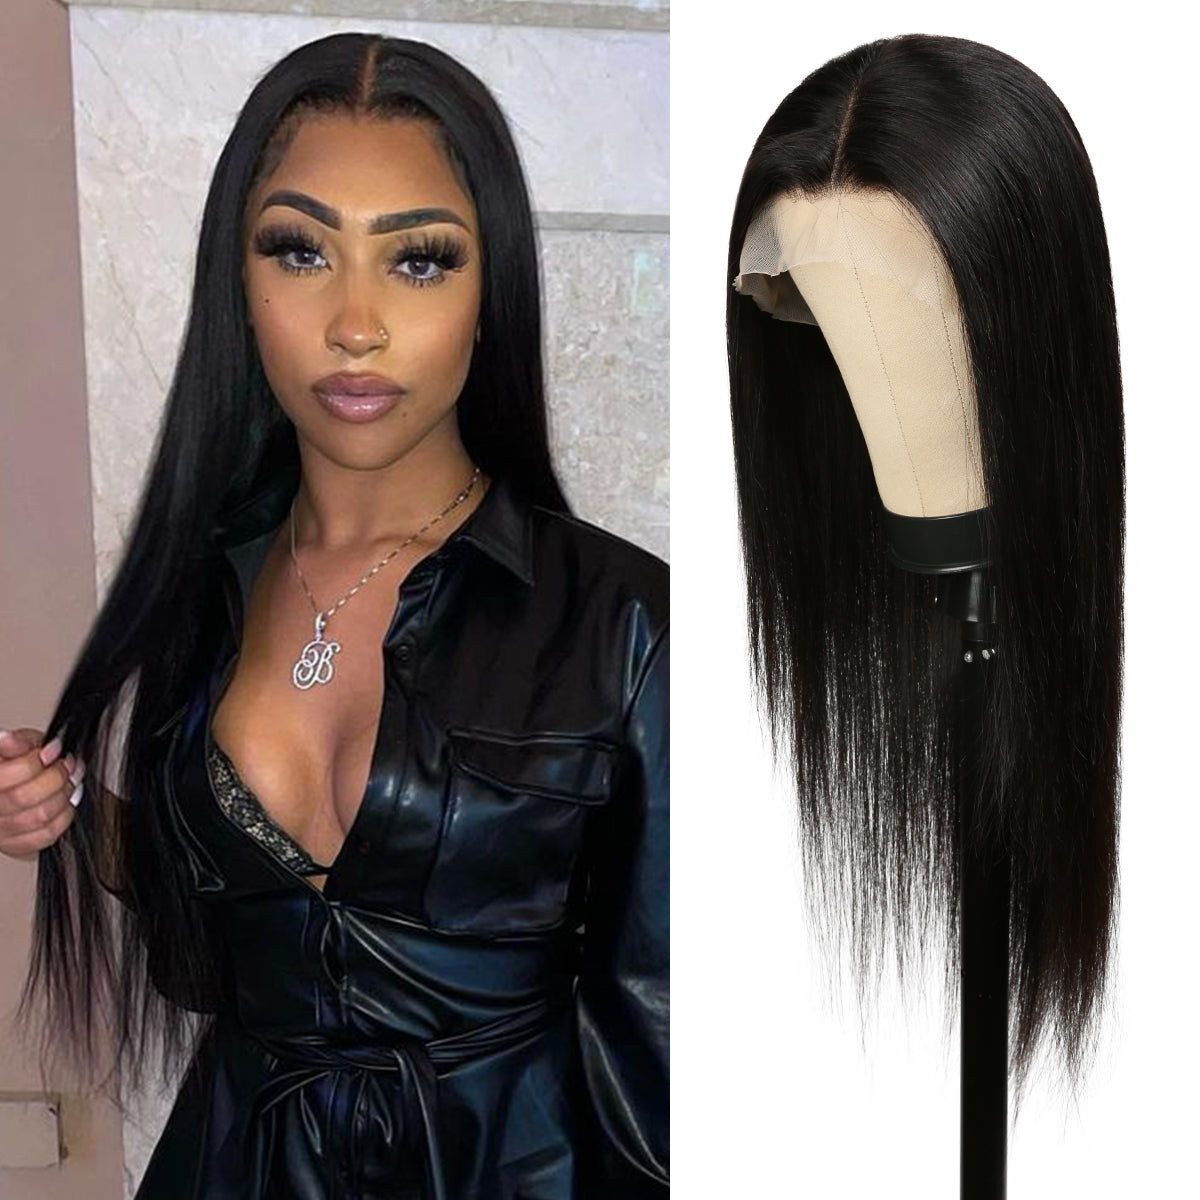 Human Hair, Lace Wig, 13x4, Frontal, Free Part, Straight, 24"